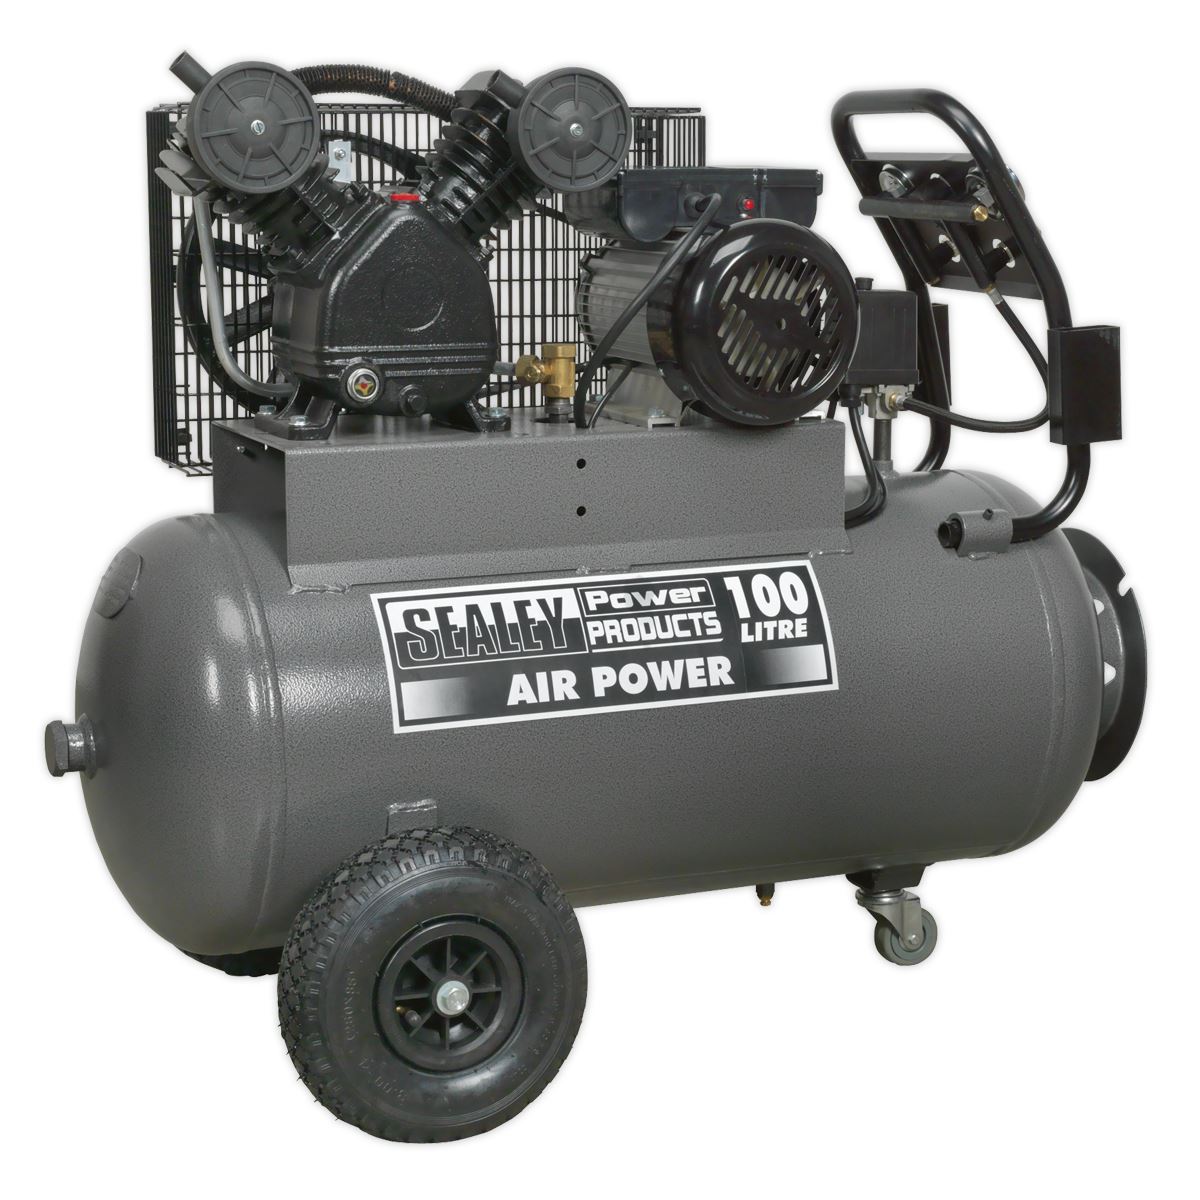 Sealey Premier Industrial Air Compressor 100L Belt Drive 3hp with Front Control Panel